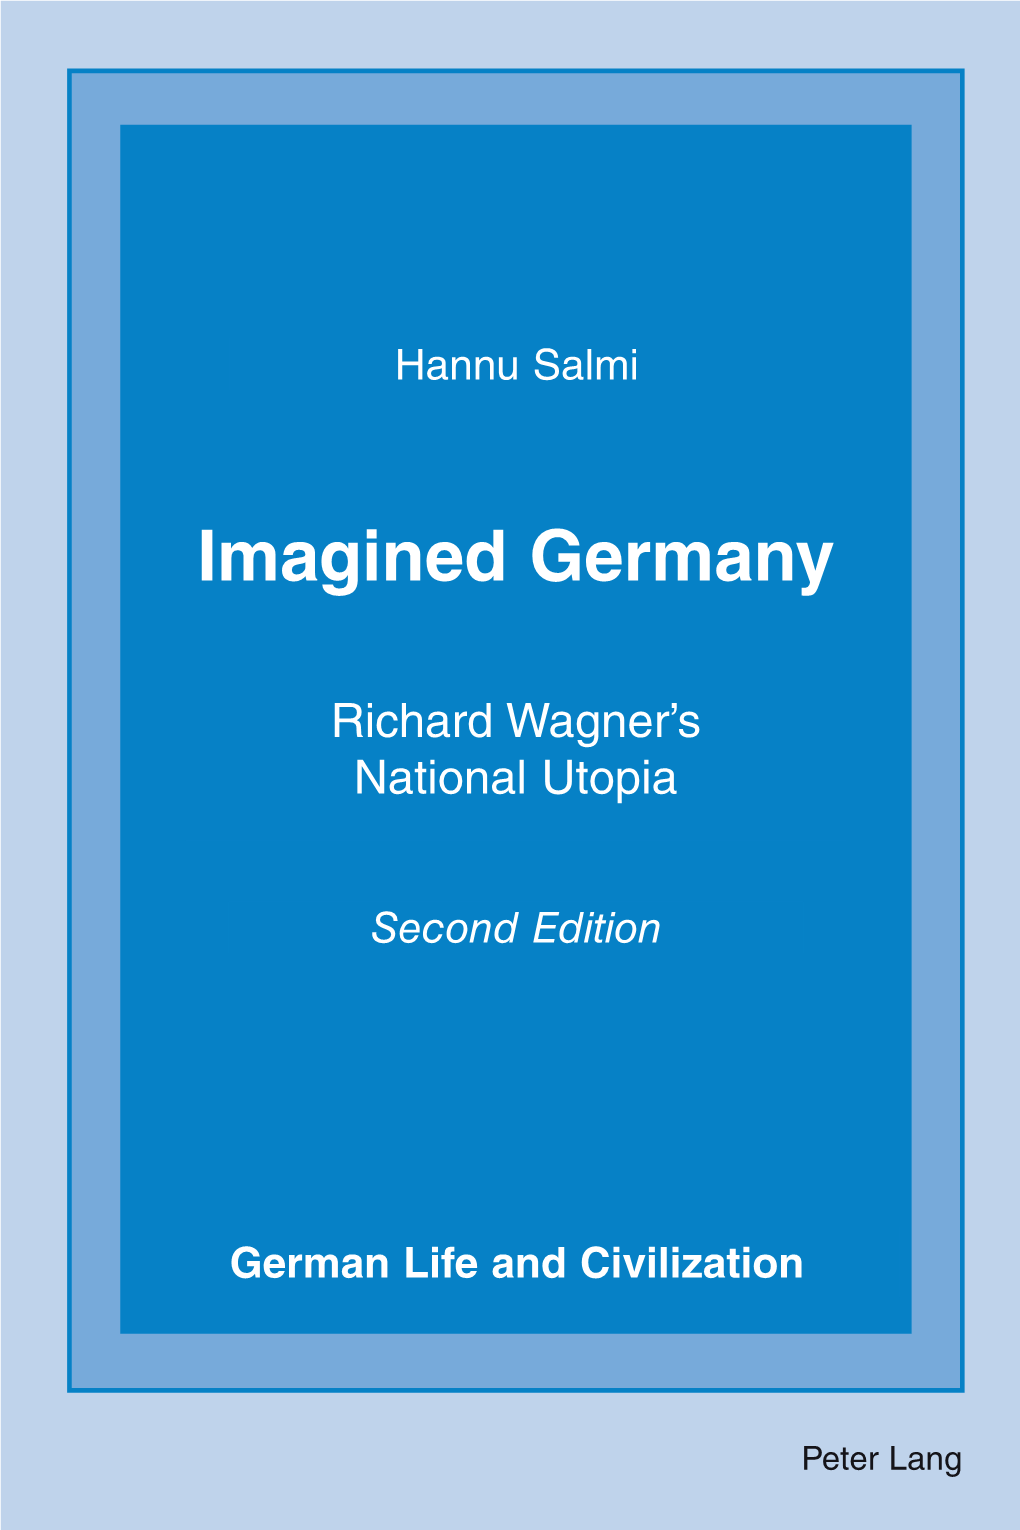 Richard Wagner's National Utopia, Second Edition